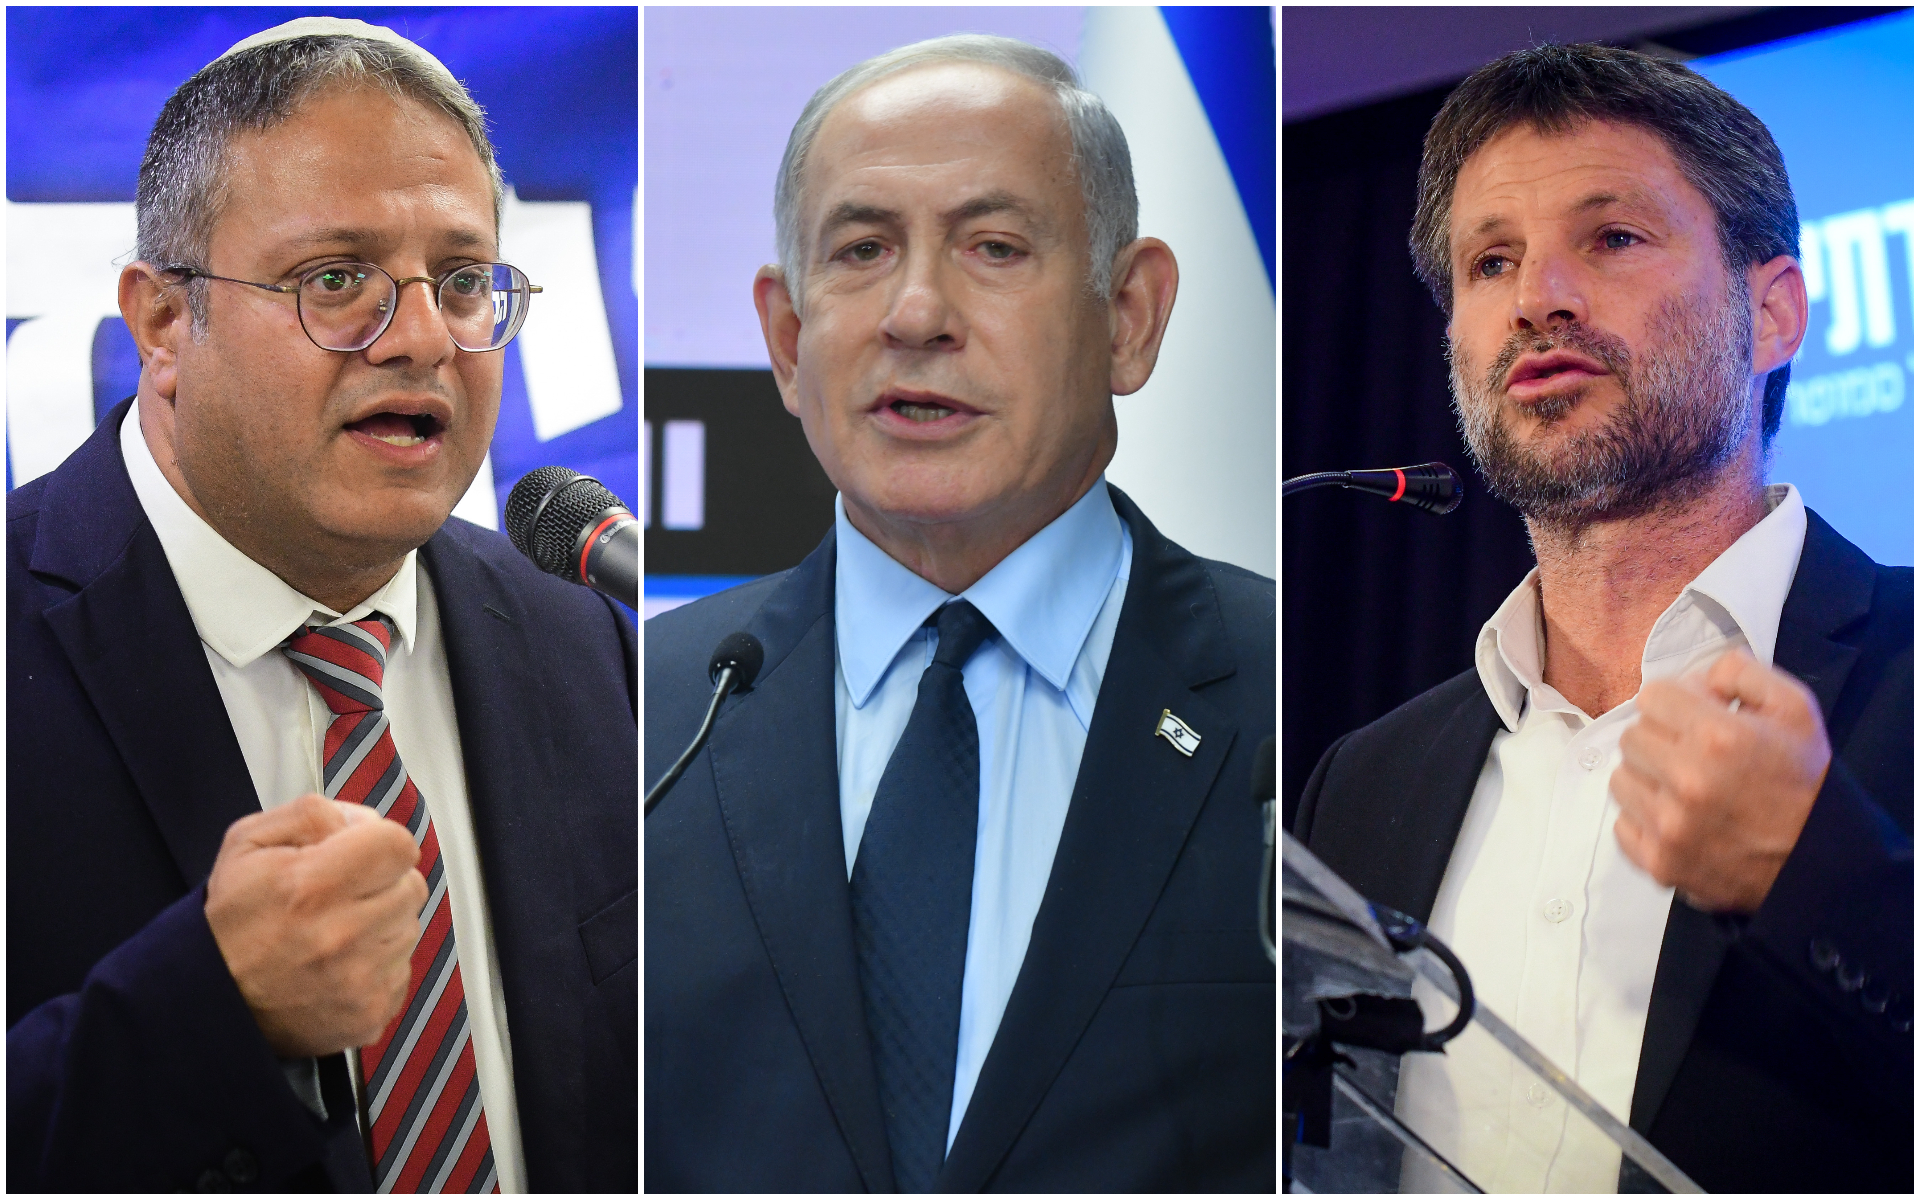 A narrow government with Ben Gvir and Smotrich threatens US-Israel ties | The Times of Israel